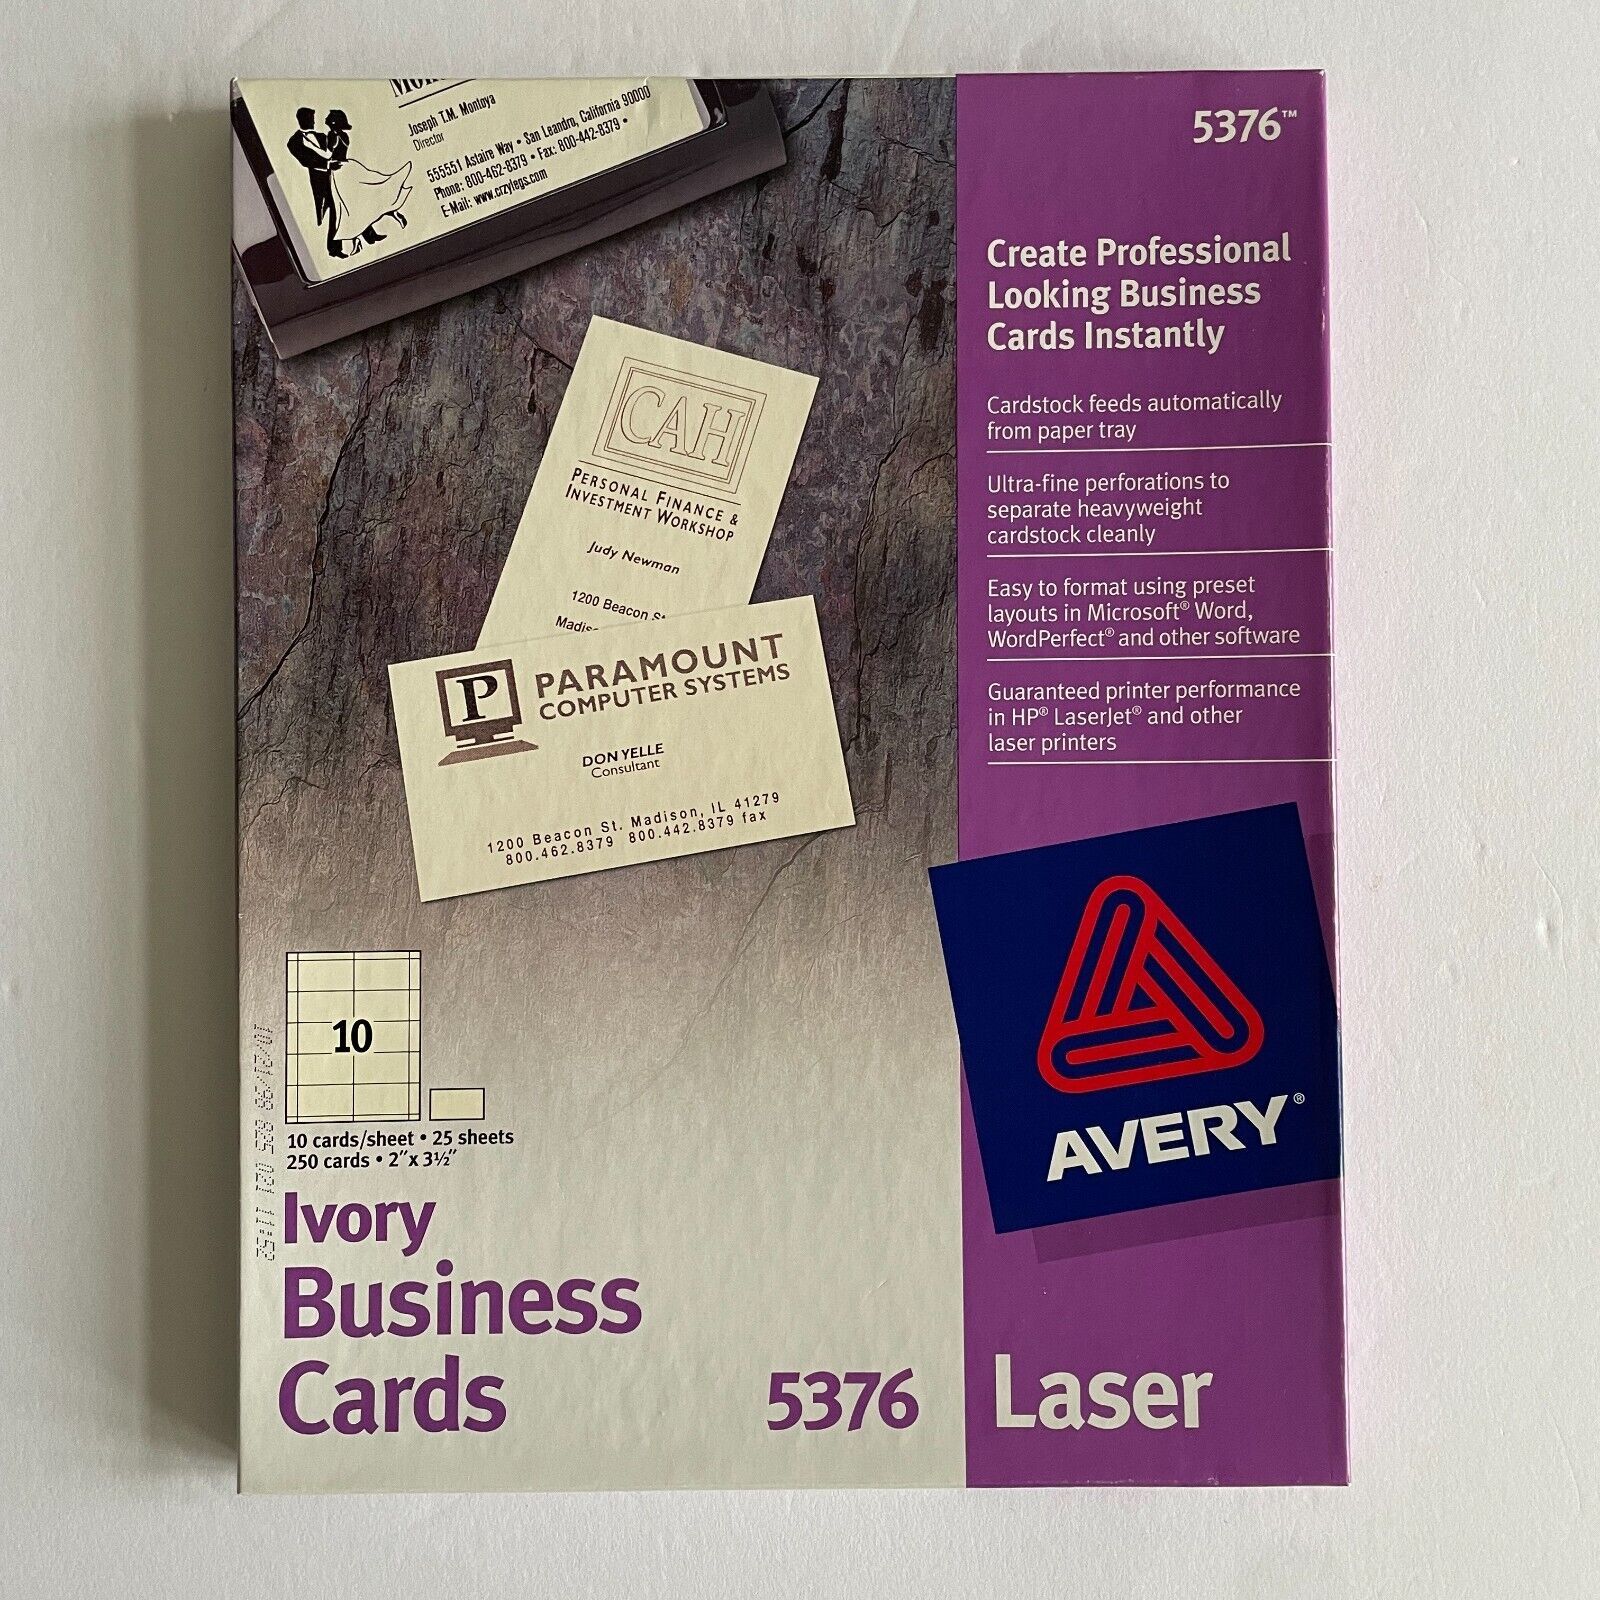 Avery 5376 Laser Business Cards 2 x 3 1/2 Ivory 250 Cards 10 Cards Per Sheet - $9.85